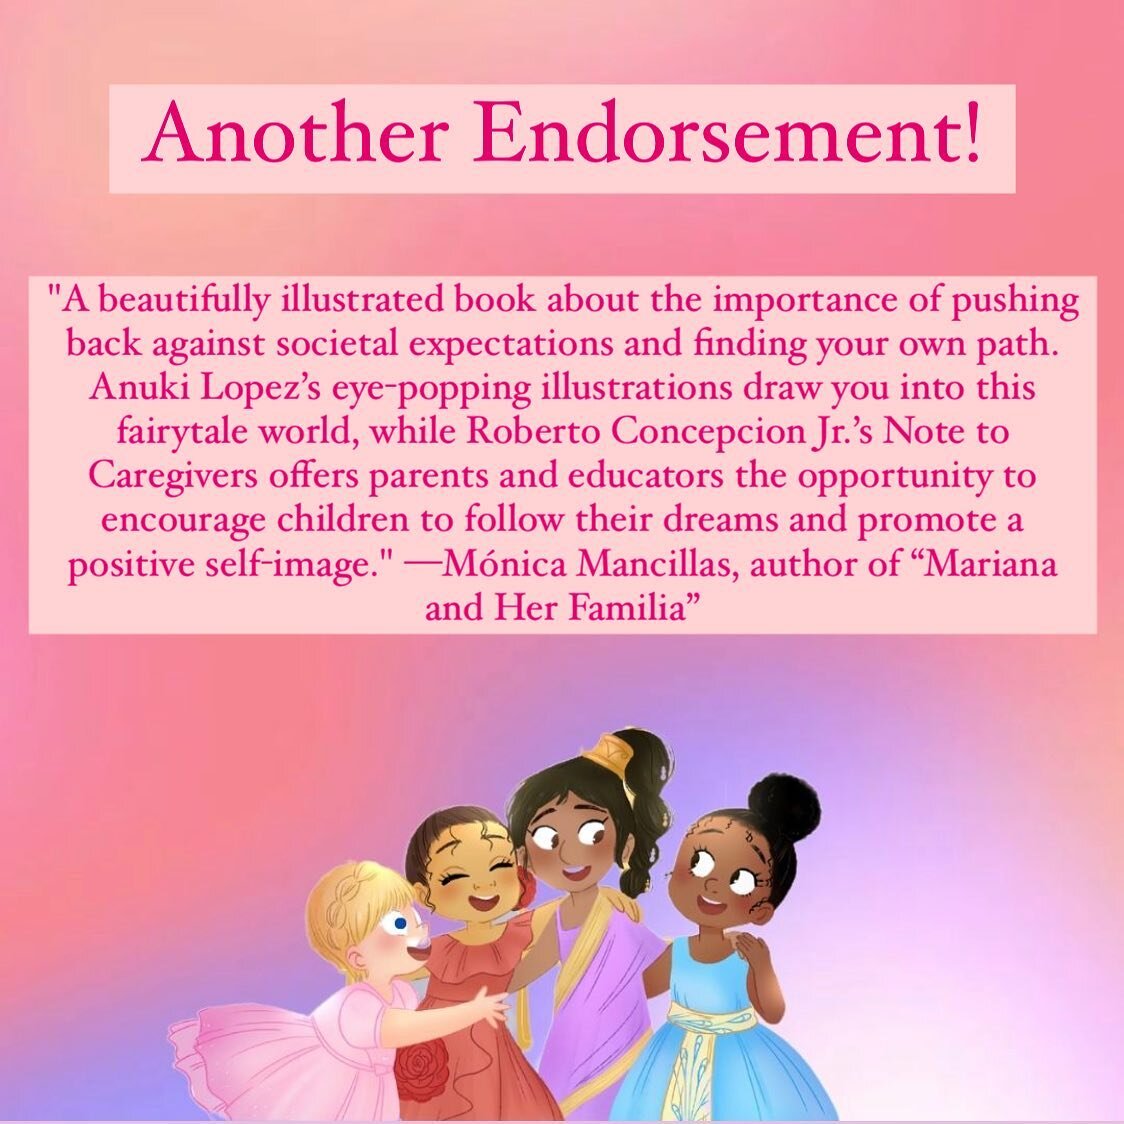 We&rsquo;re excited to share another endorsement, this time from @monicamancillas77, author of &ldquo;Mariana and Her Familia&rdquo;!
📣
 &ldquo;A beautifully illustrated book about the importance of pushing back against societal expectations and fin